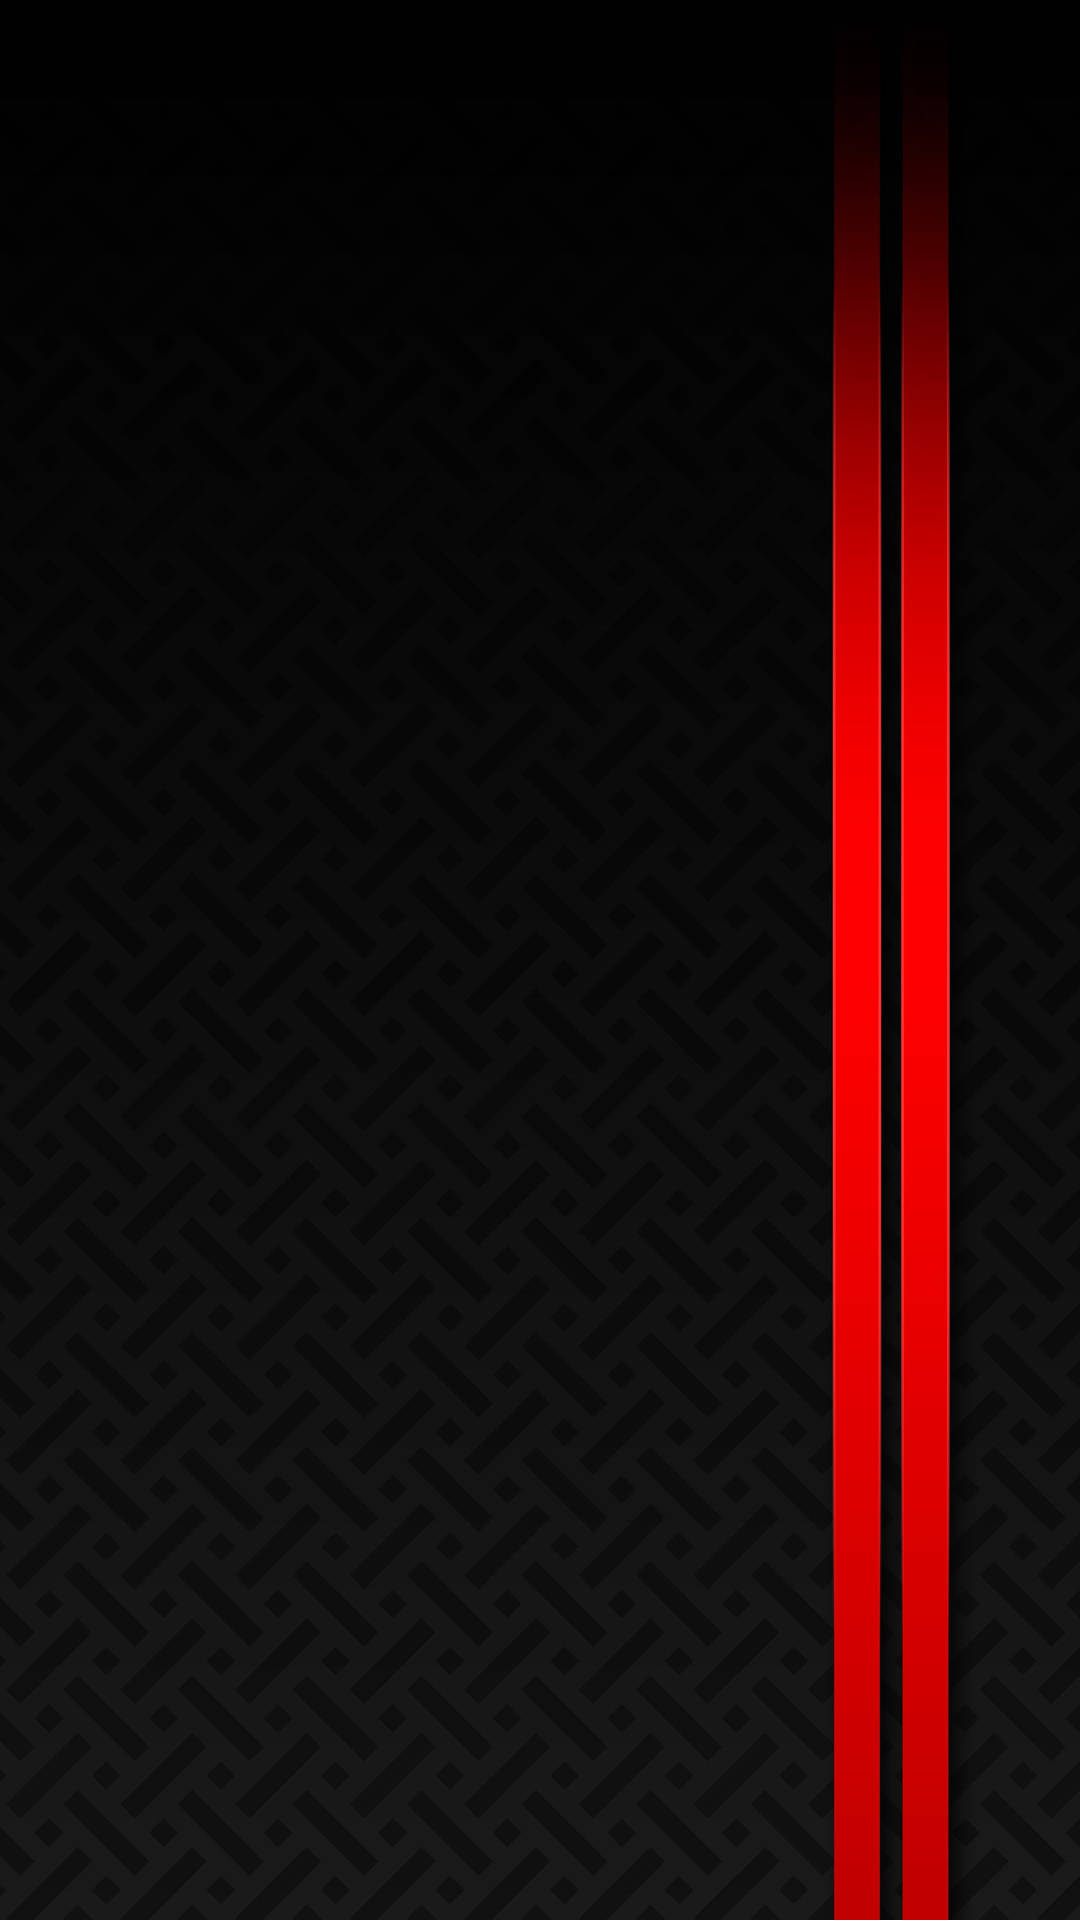 Abstract Metallic Red And Black Pattern Wallpaper